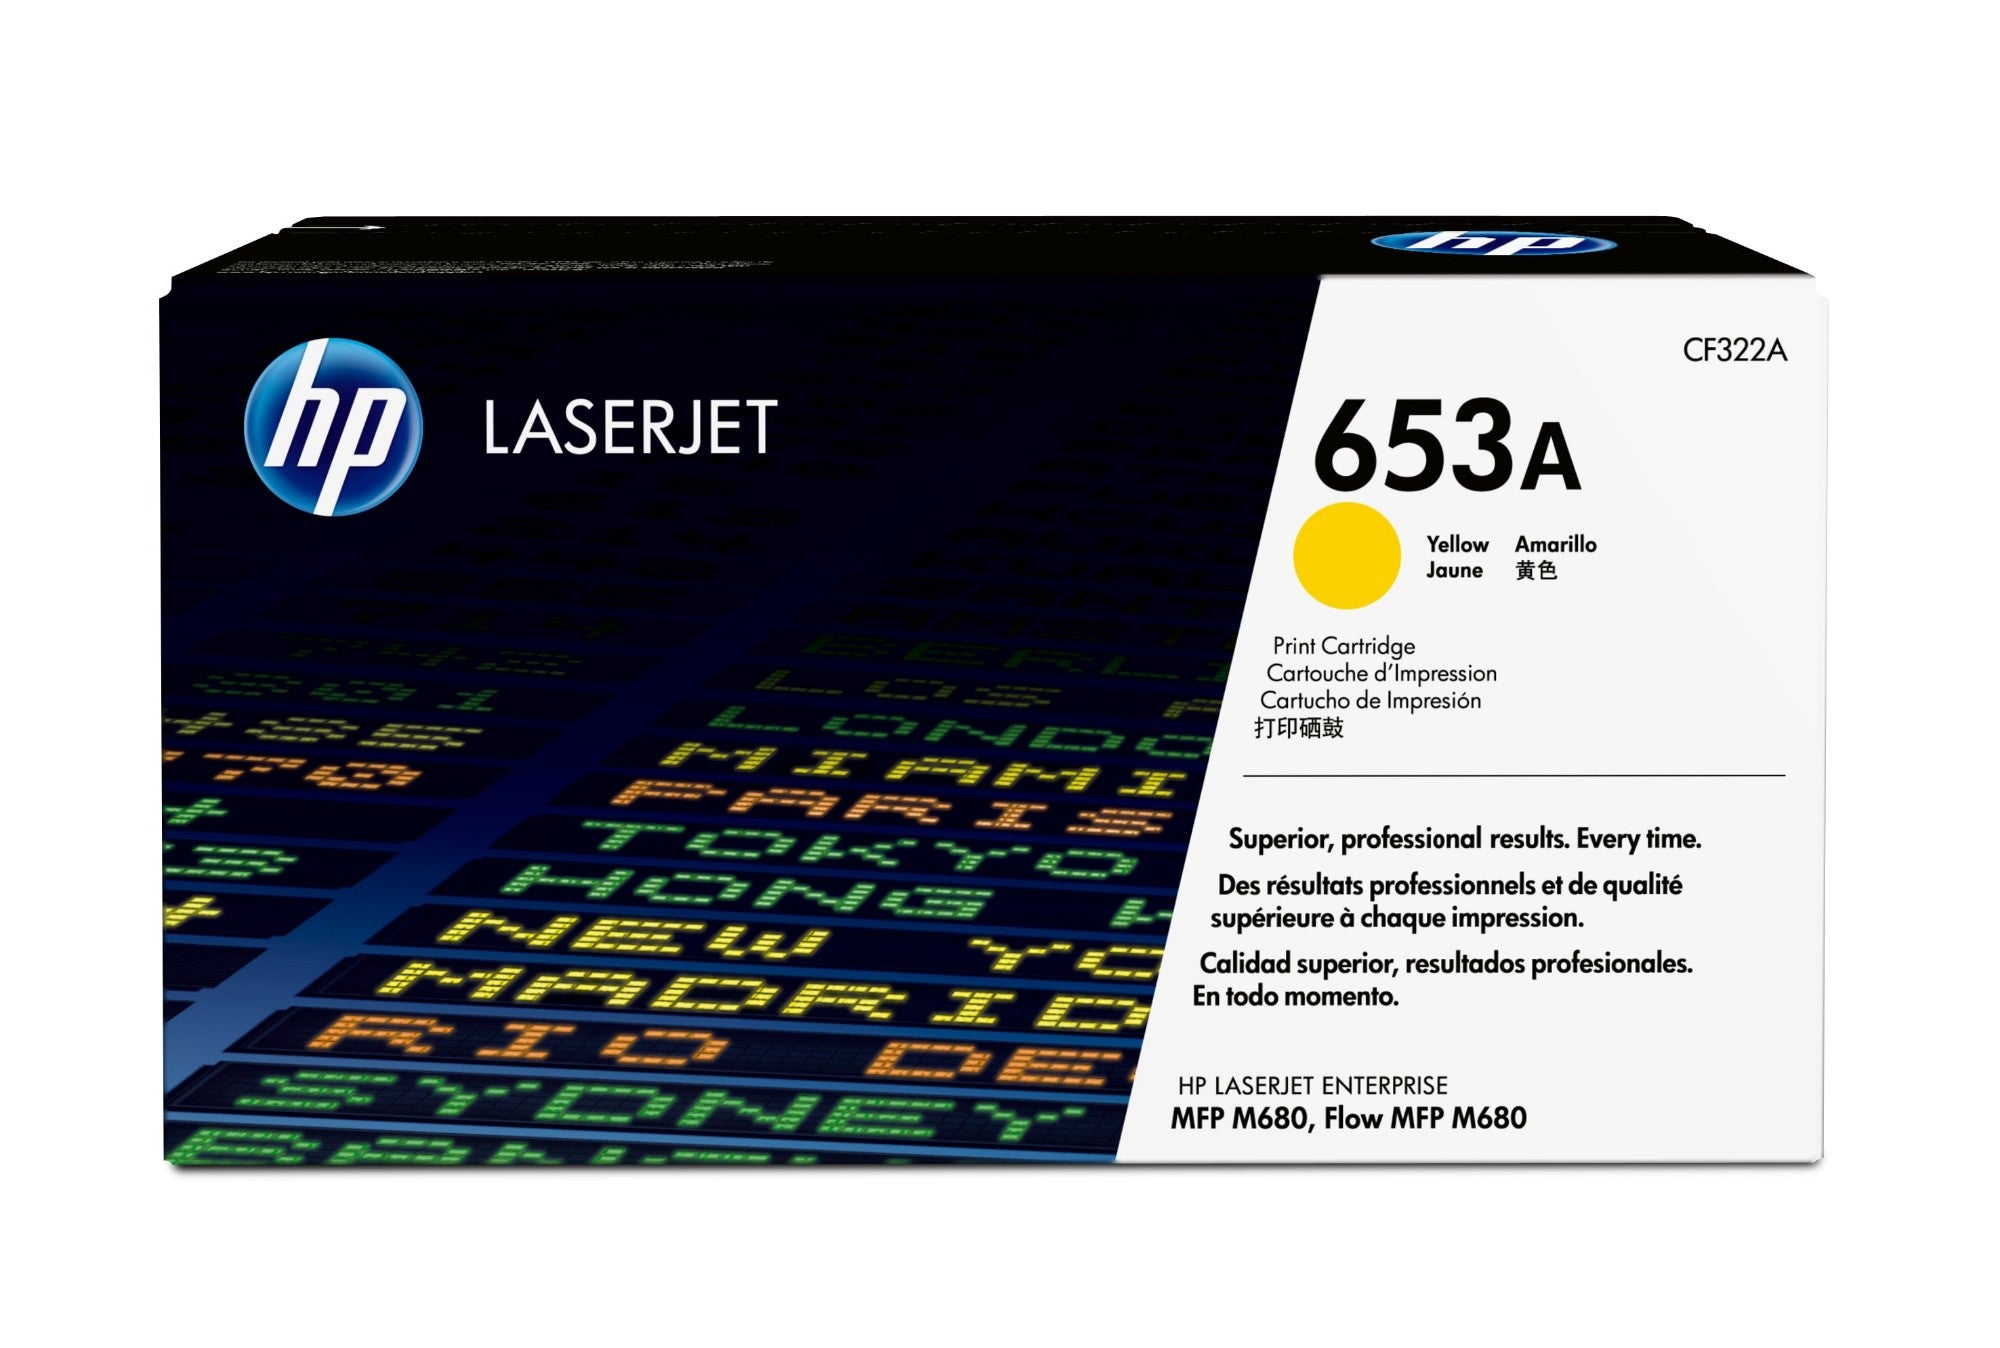 HP CF322A/653A Toner cartridge yellow, 16.5K pages ISO/IEC 19798 for HP Color LaserJet M 680